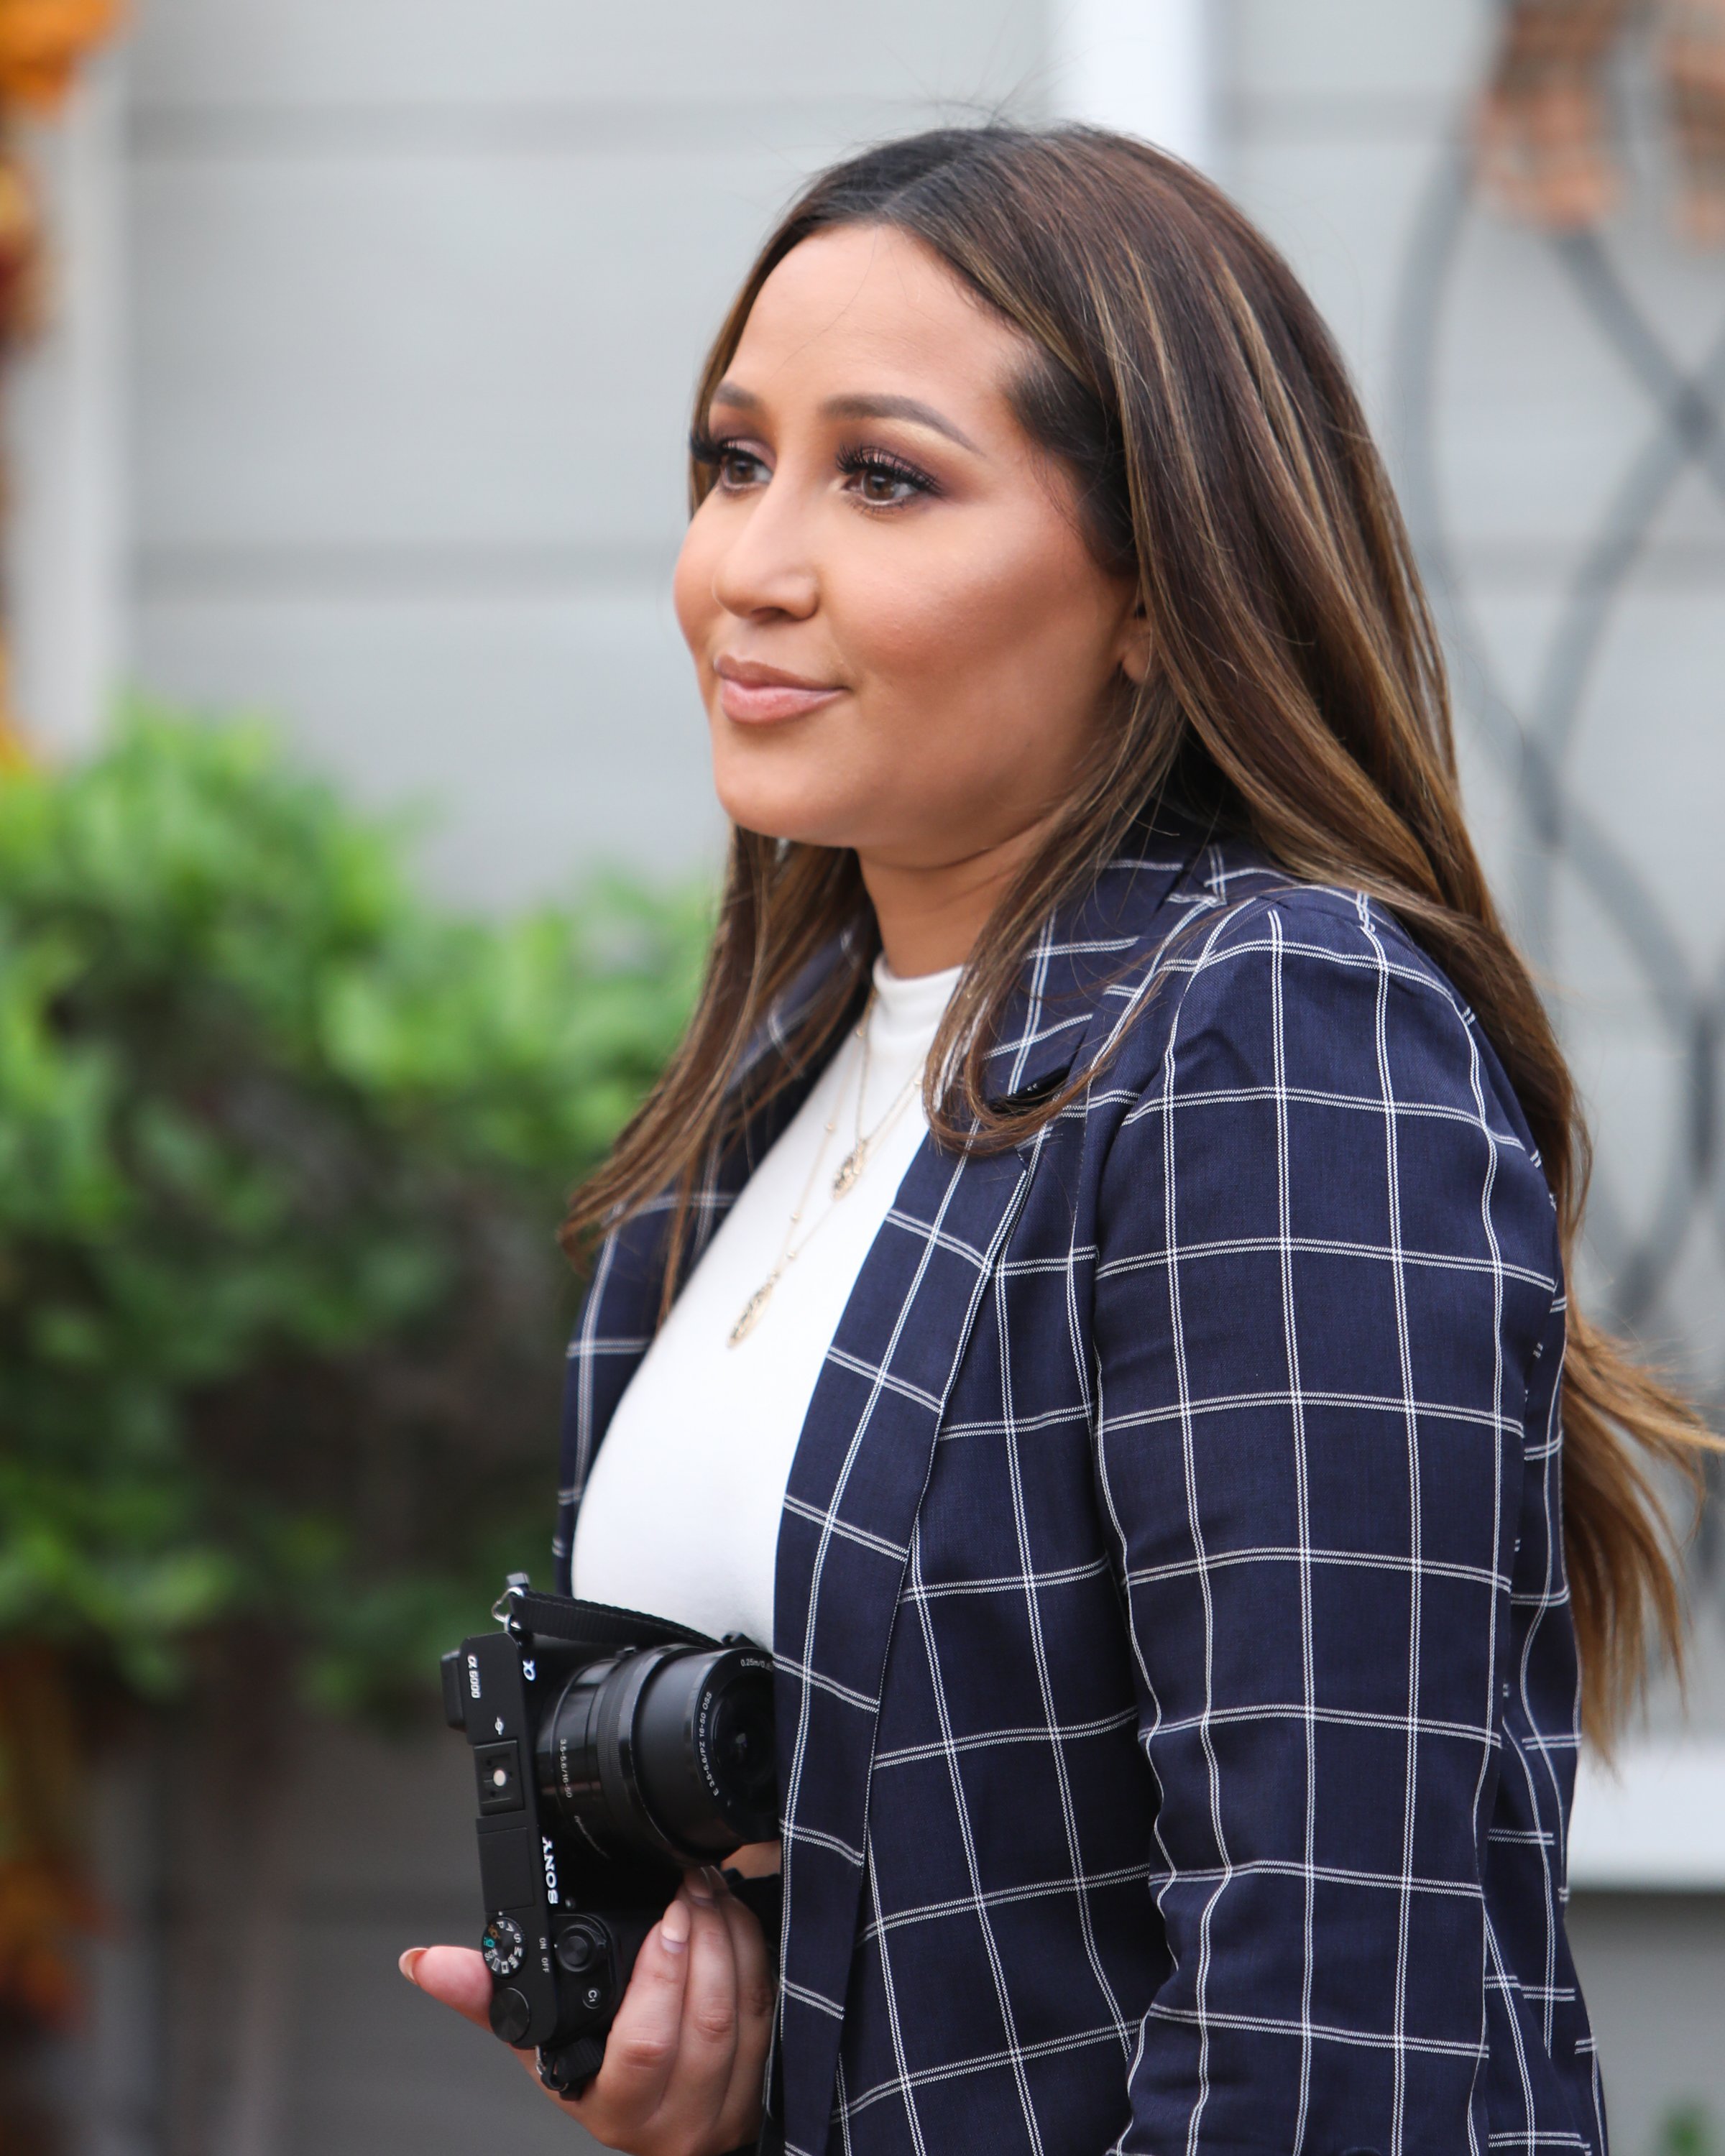  Adrienne Houghton visits Hallmark's "Home & Family" at Universal Studios Hollywood on October 5, 2018 in Universal City, California | Photo: GettyImages